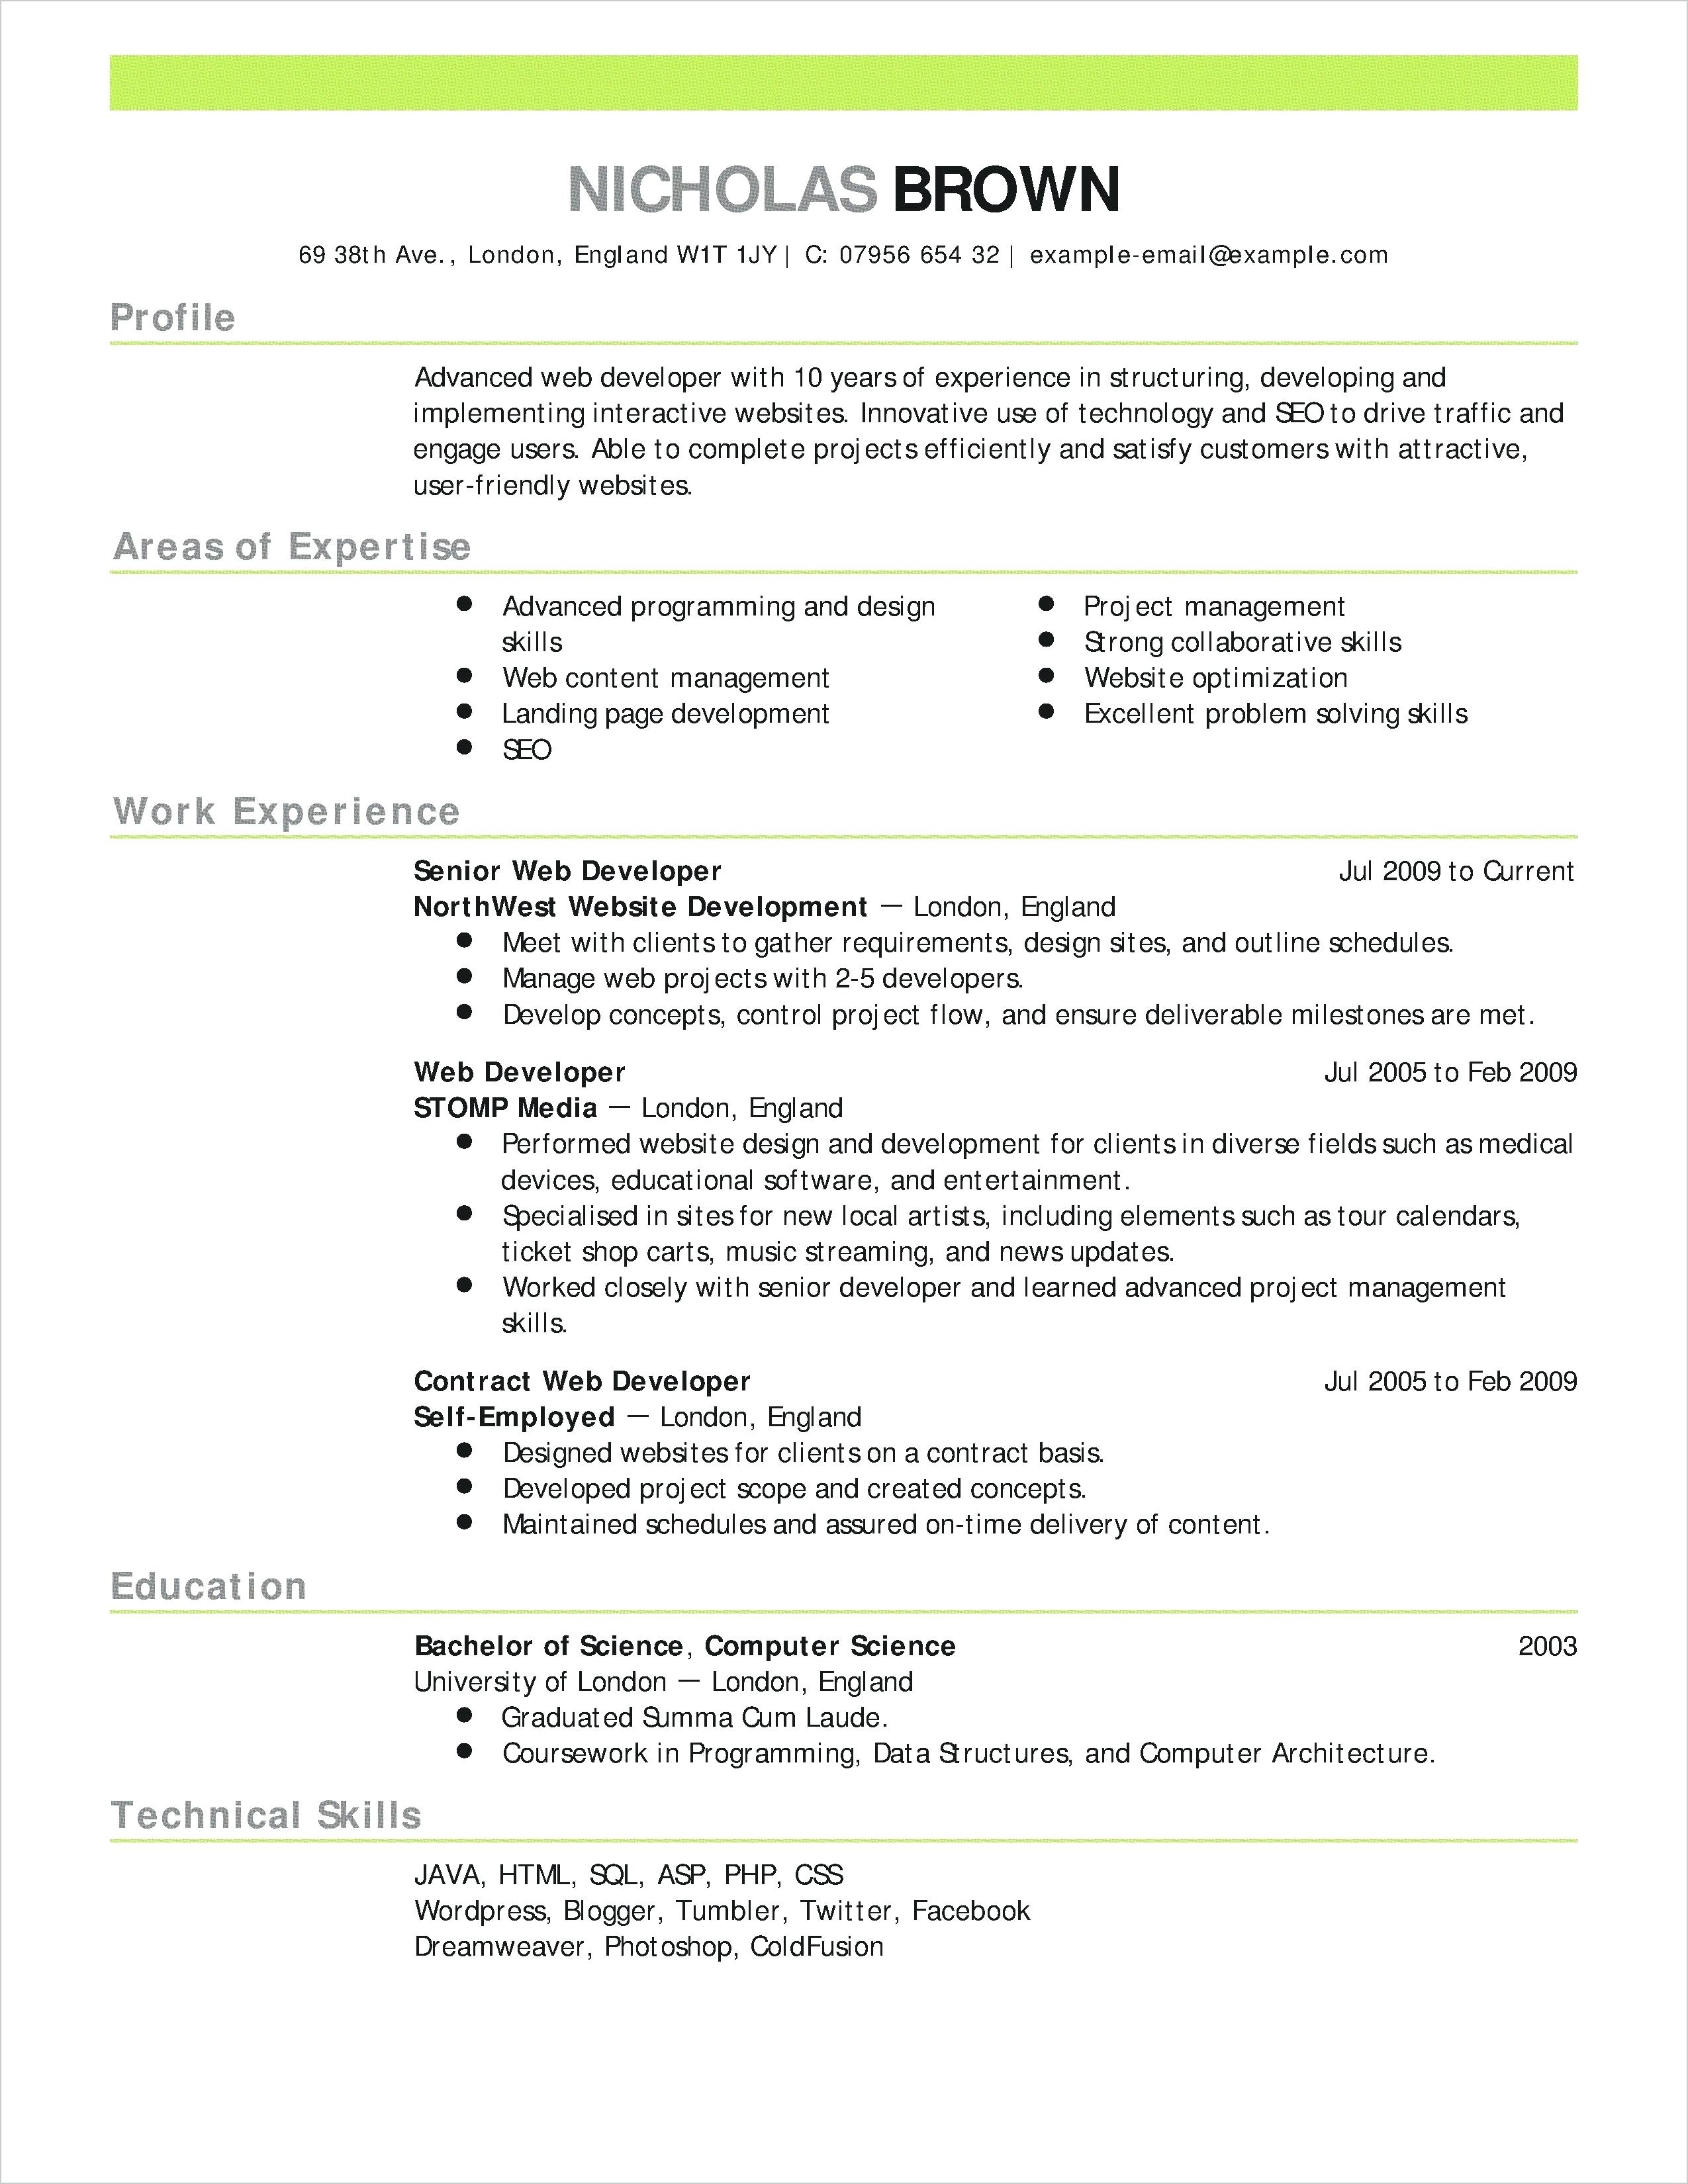 Resume Templates Free Download Template Word Stock A Creative Resume Templates Free Download X Driver resume templates free download|wikiresume.com